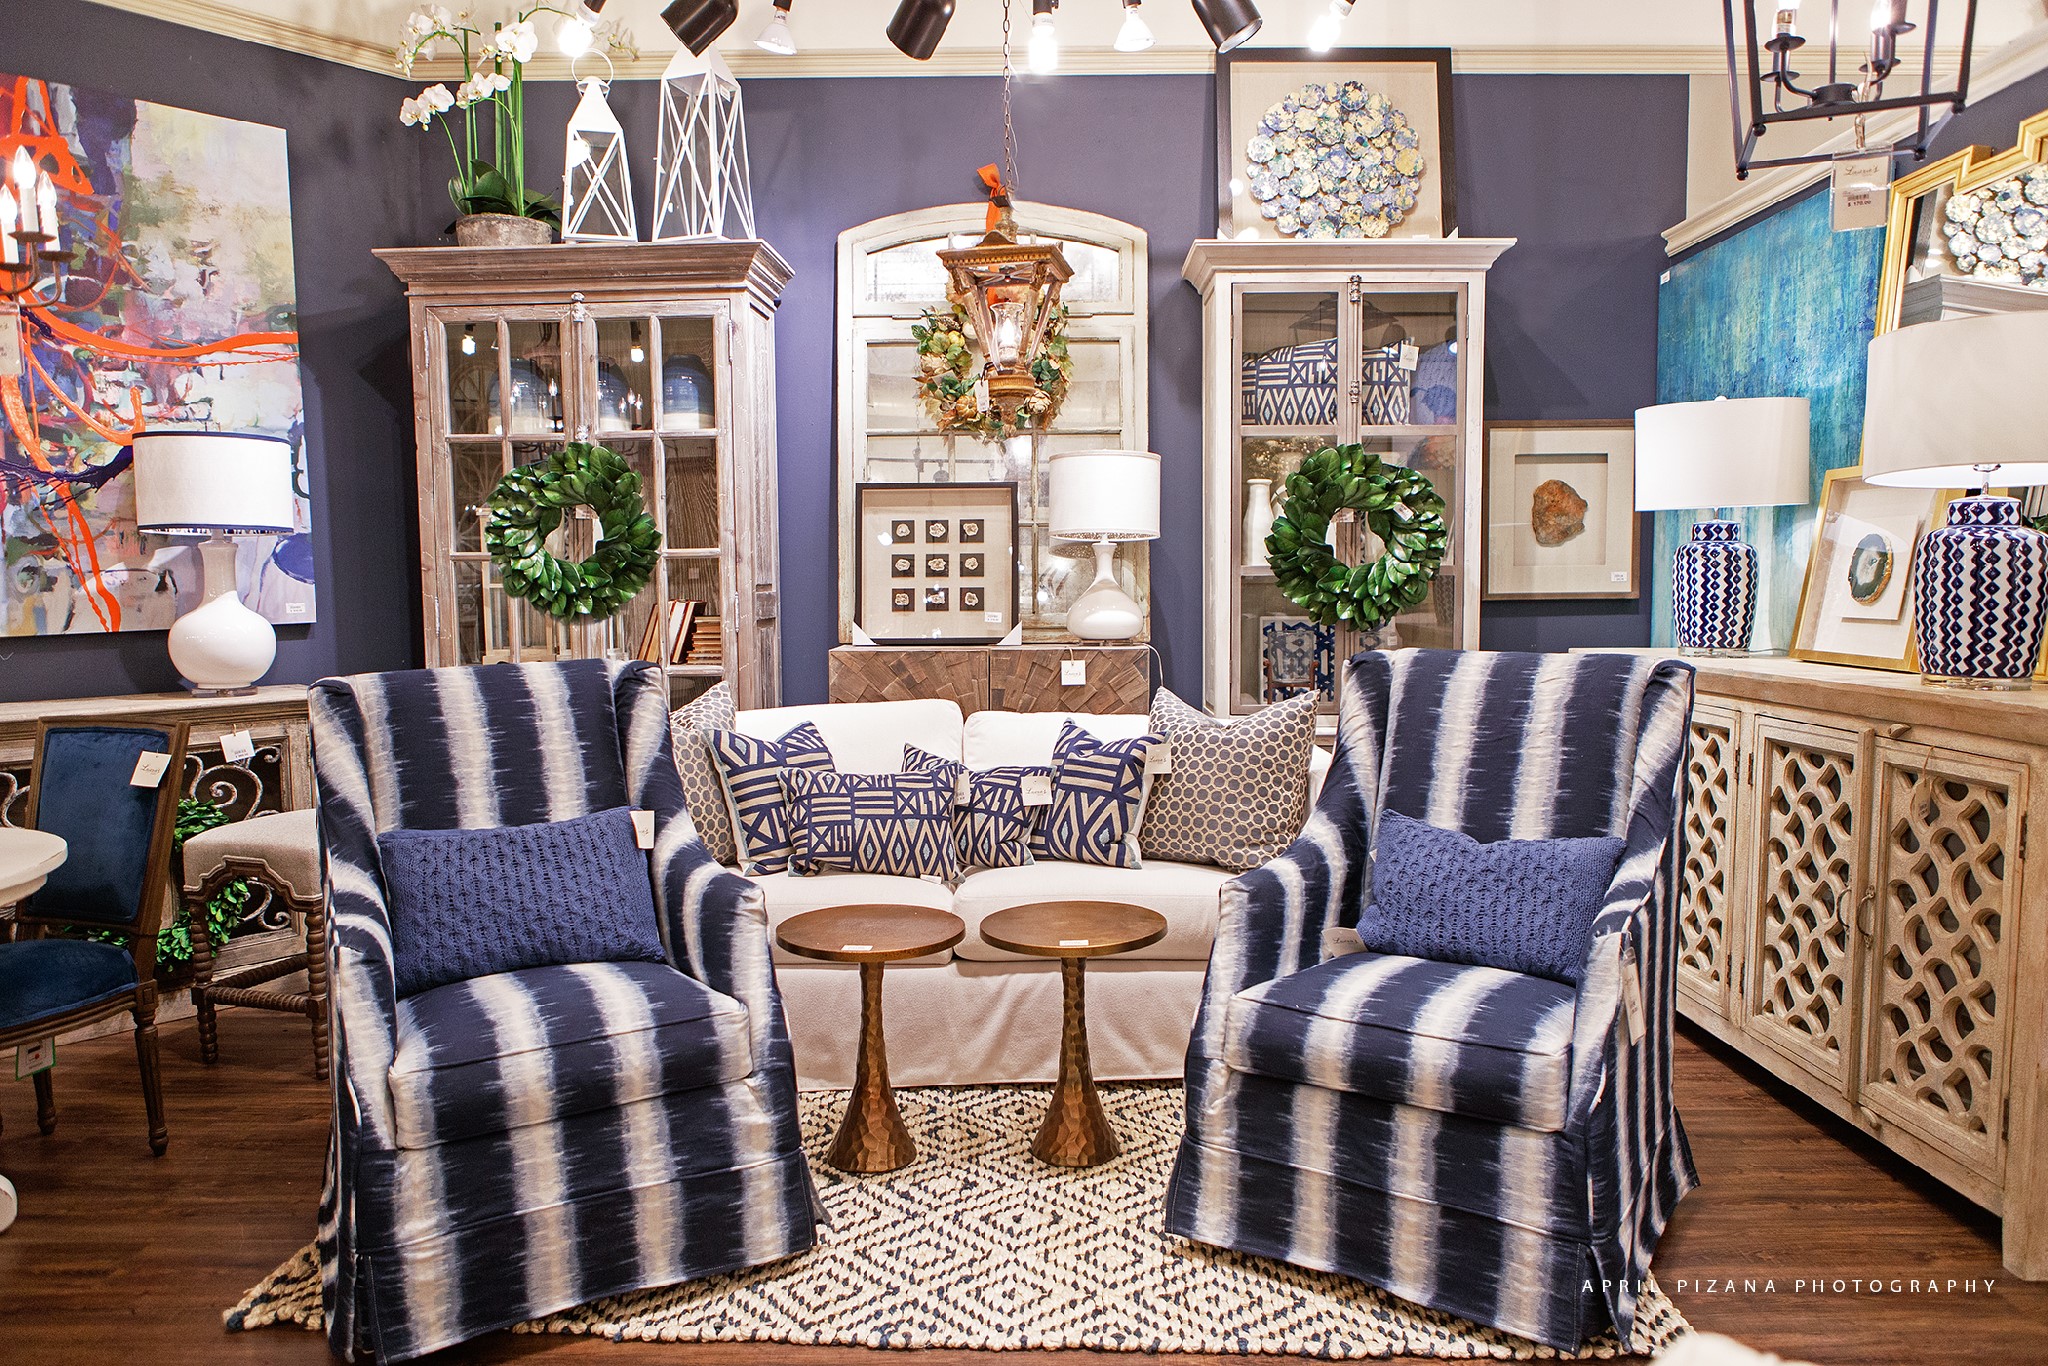 Laurie S Home Furnishings Furniture And Accessories In Tomball